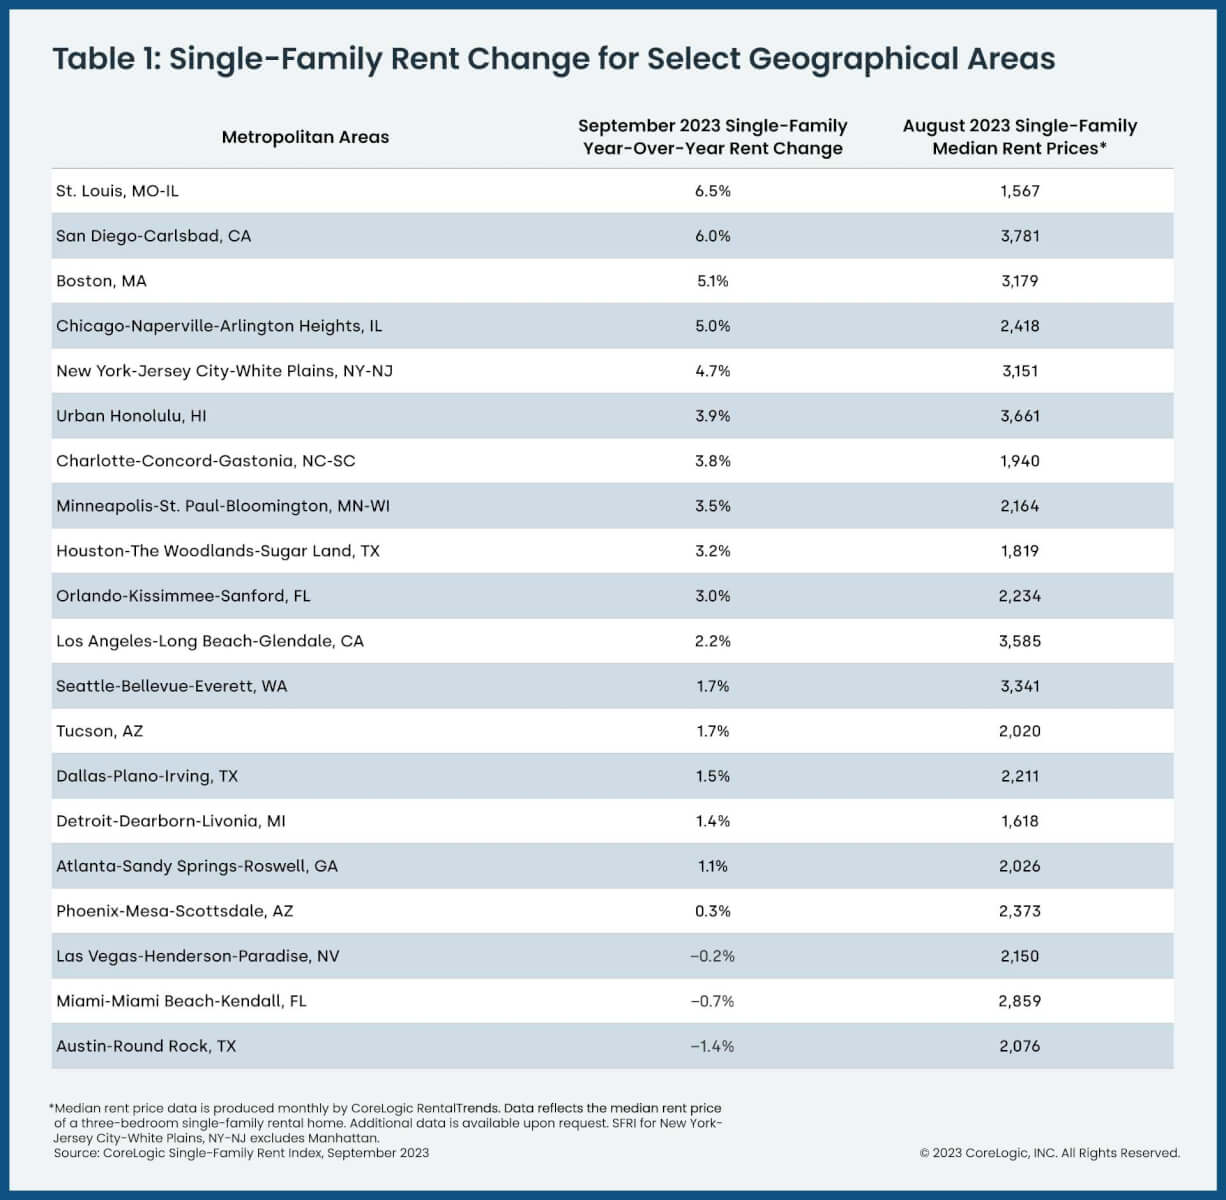 Annual rent changes for 20 select U.S. markets as of September 2023